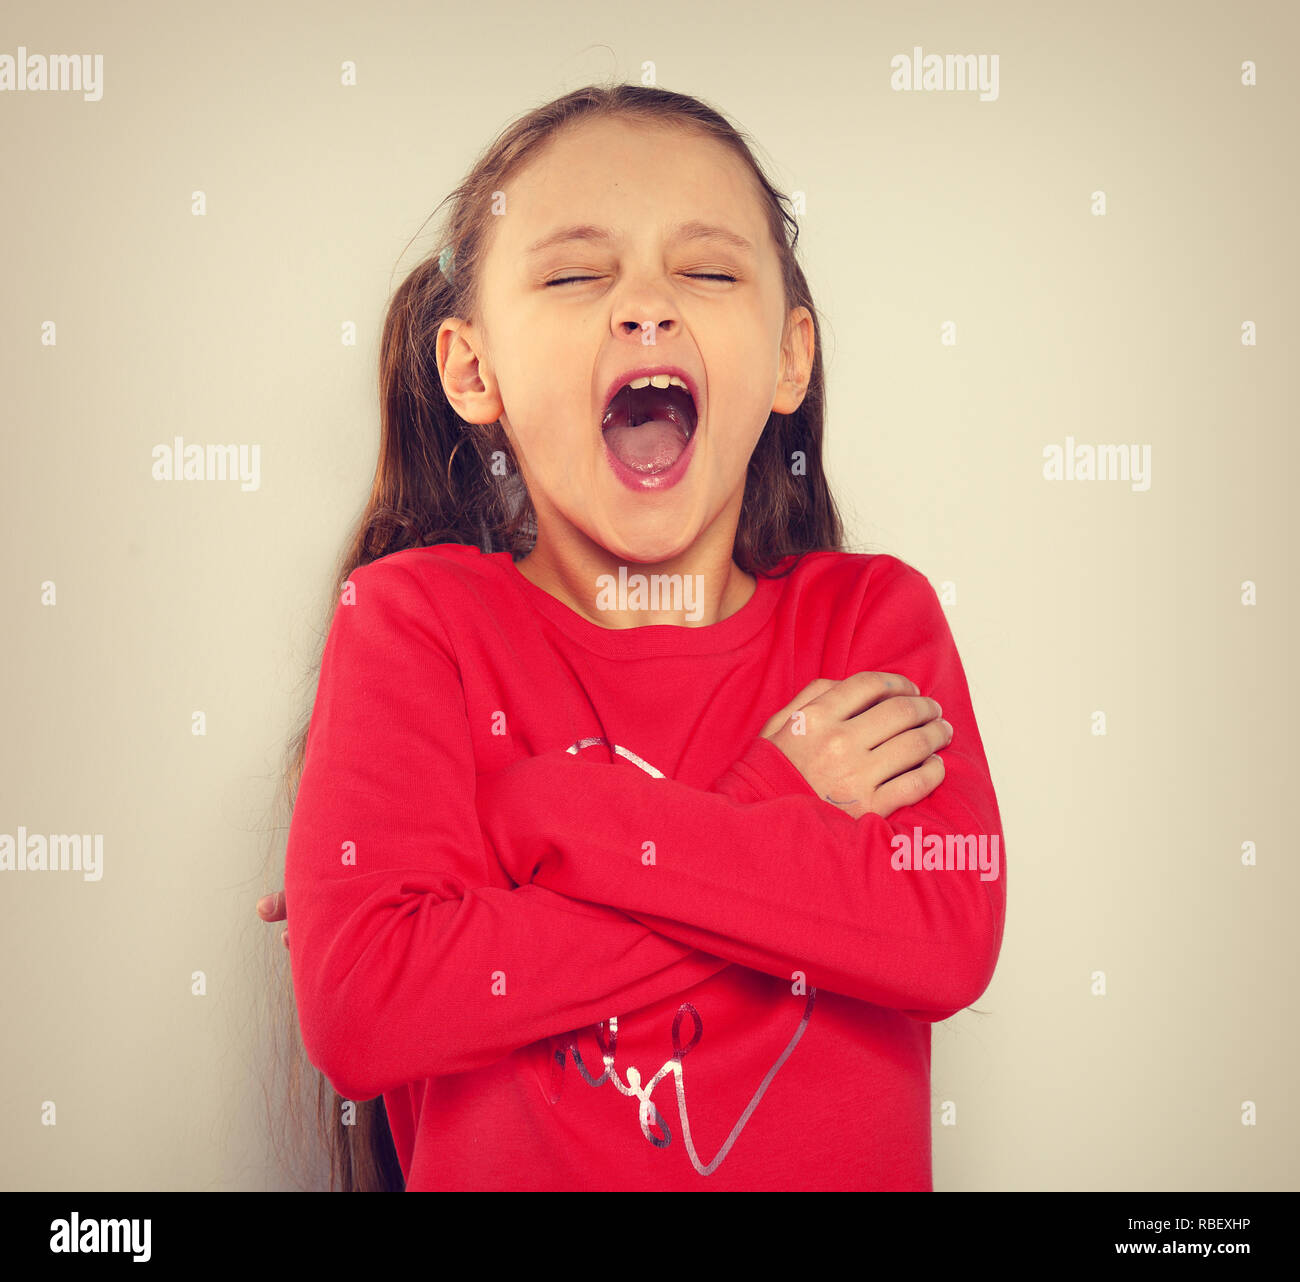 Kid girl strong screaming with open mouth and folded arms on toned vintage background with empty copy space Stock Photo